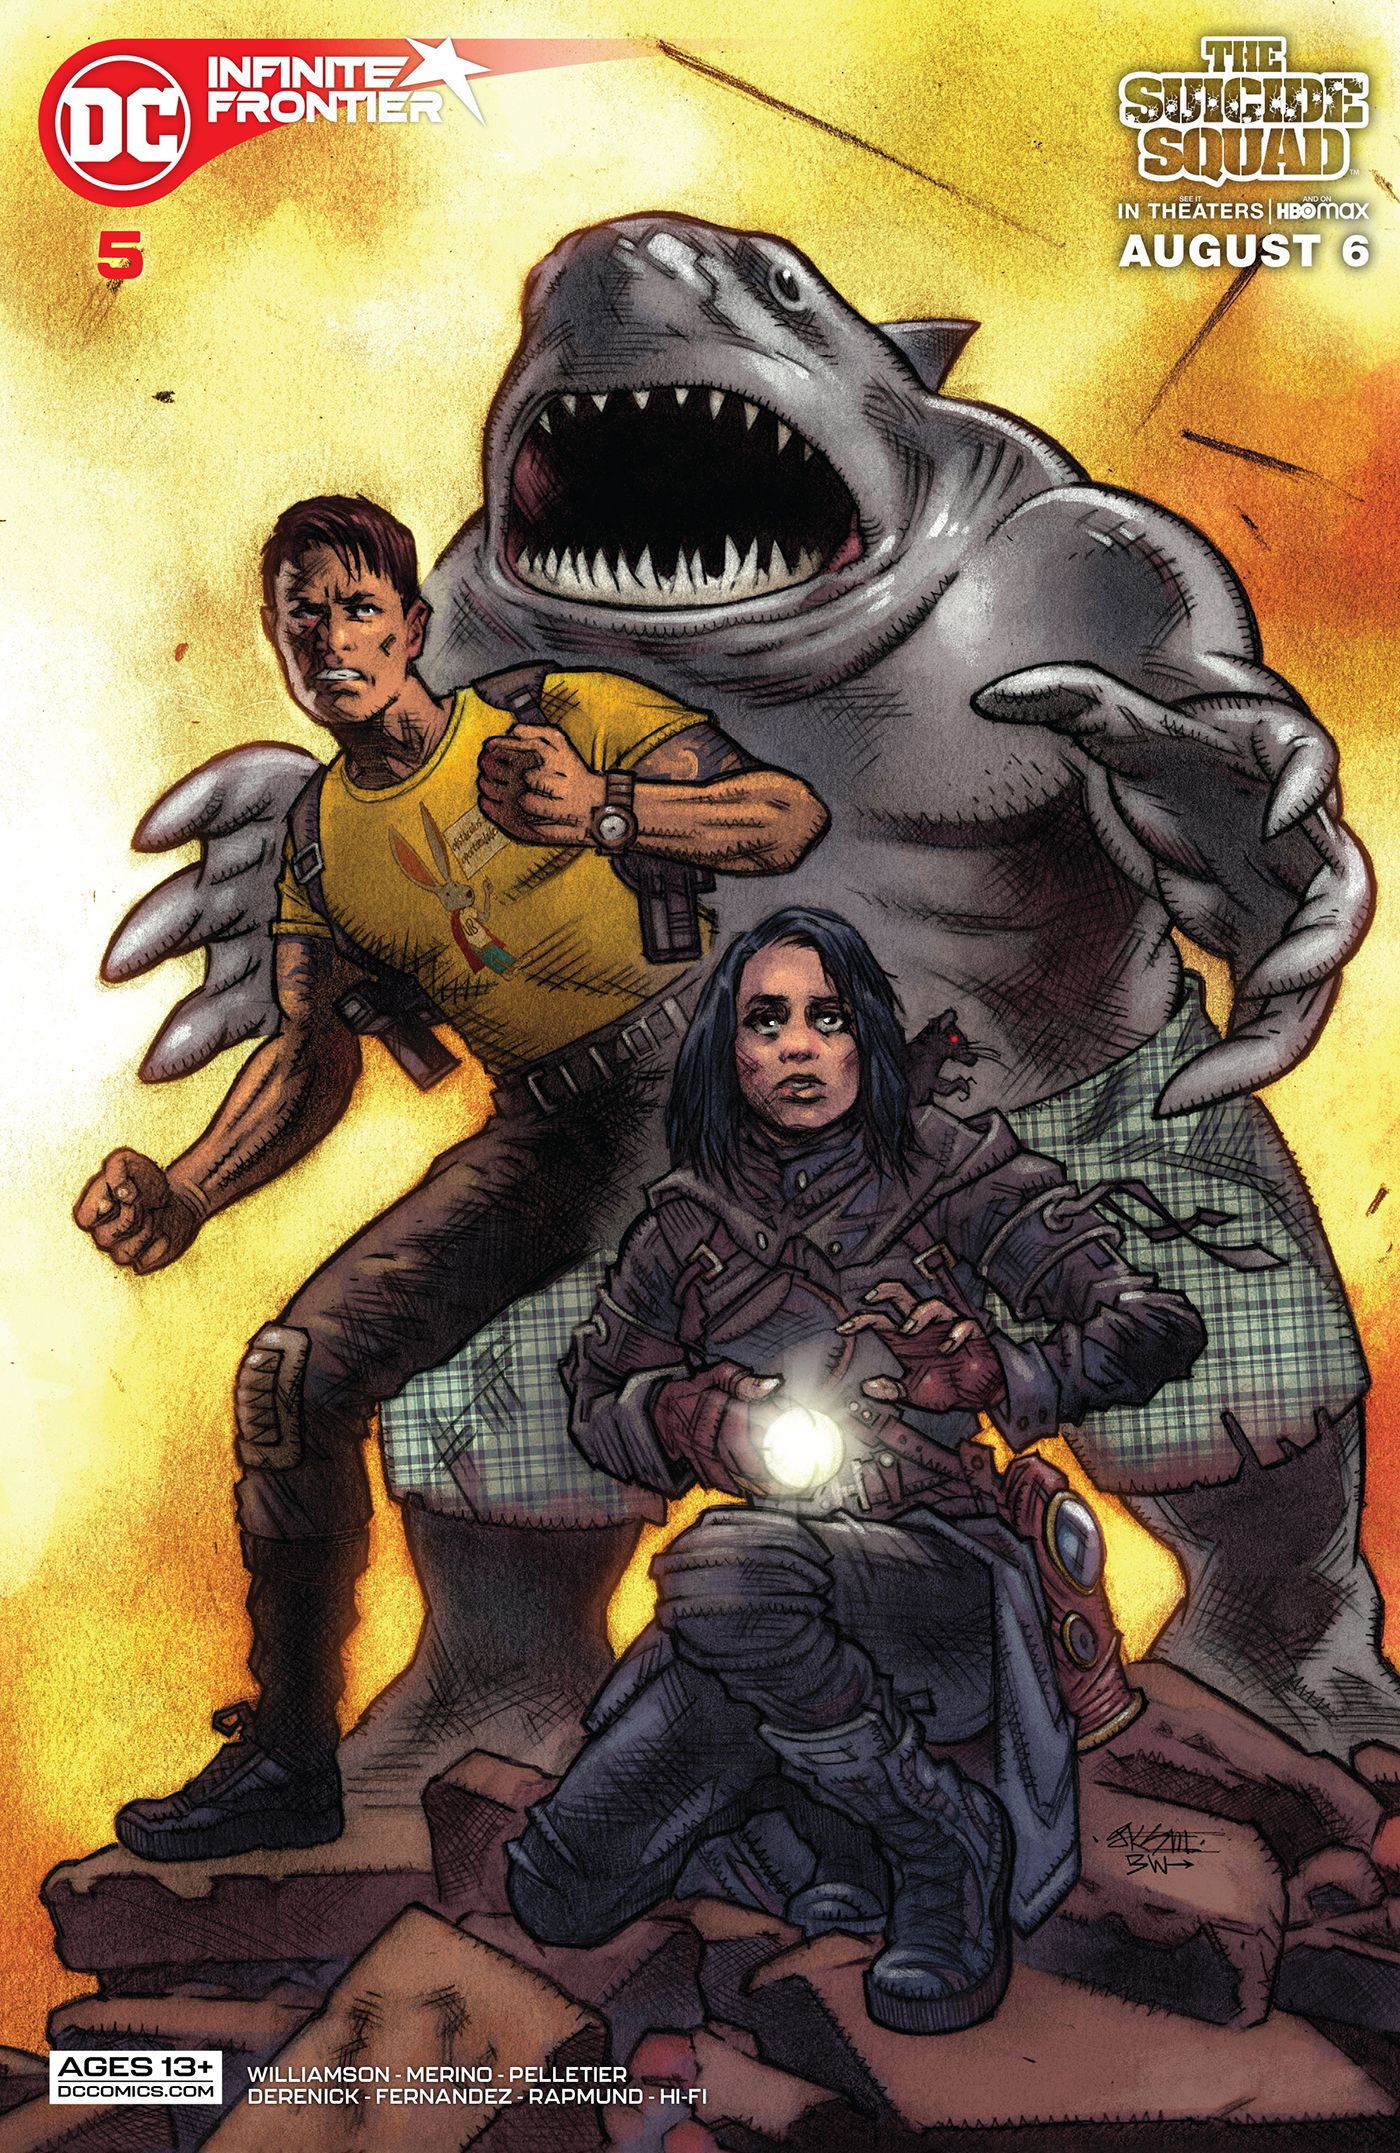 A variant cover for Infinite Frontier #5 shows King Shark, Rick Flag and Ratcatcher #2 from The Suicide Squad movie.